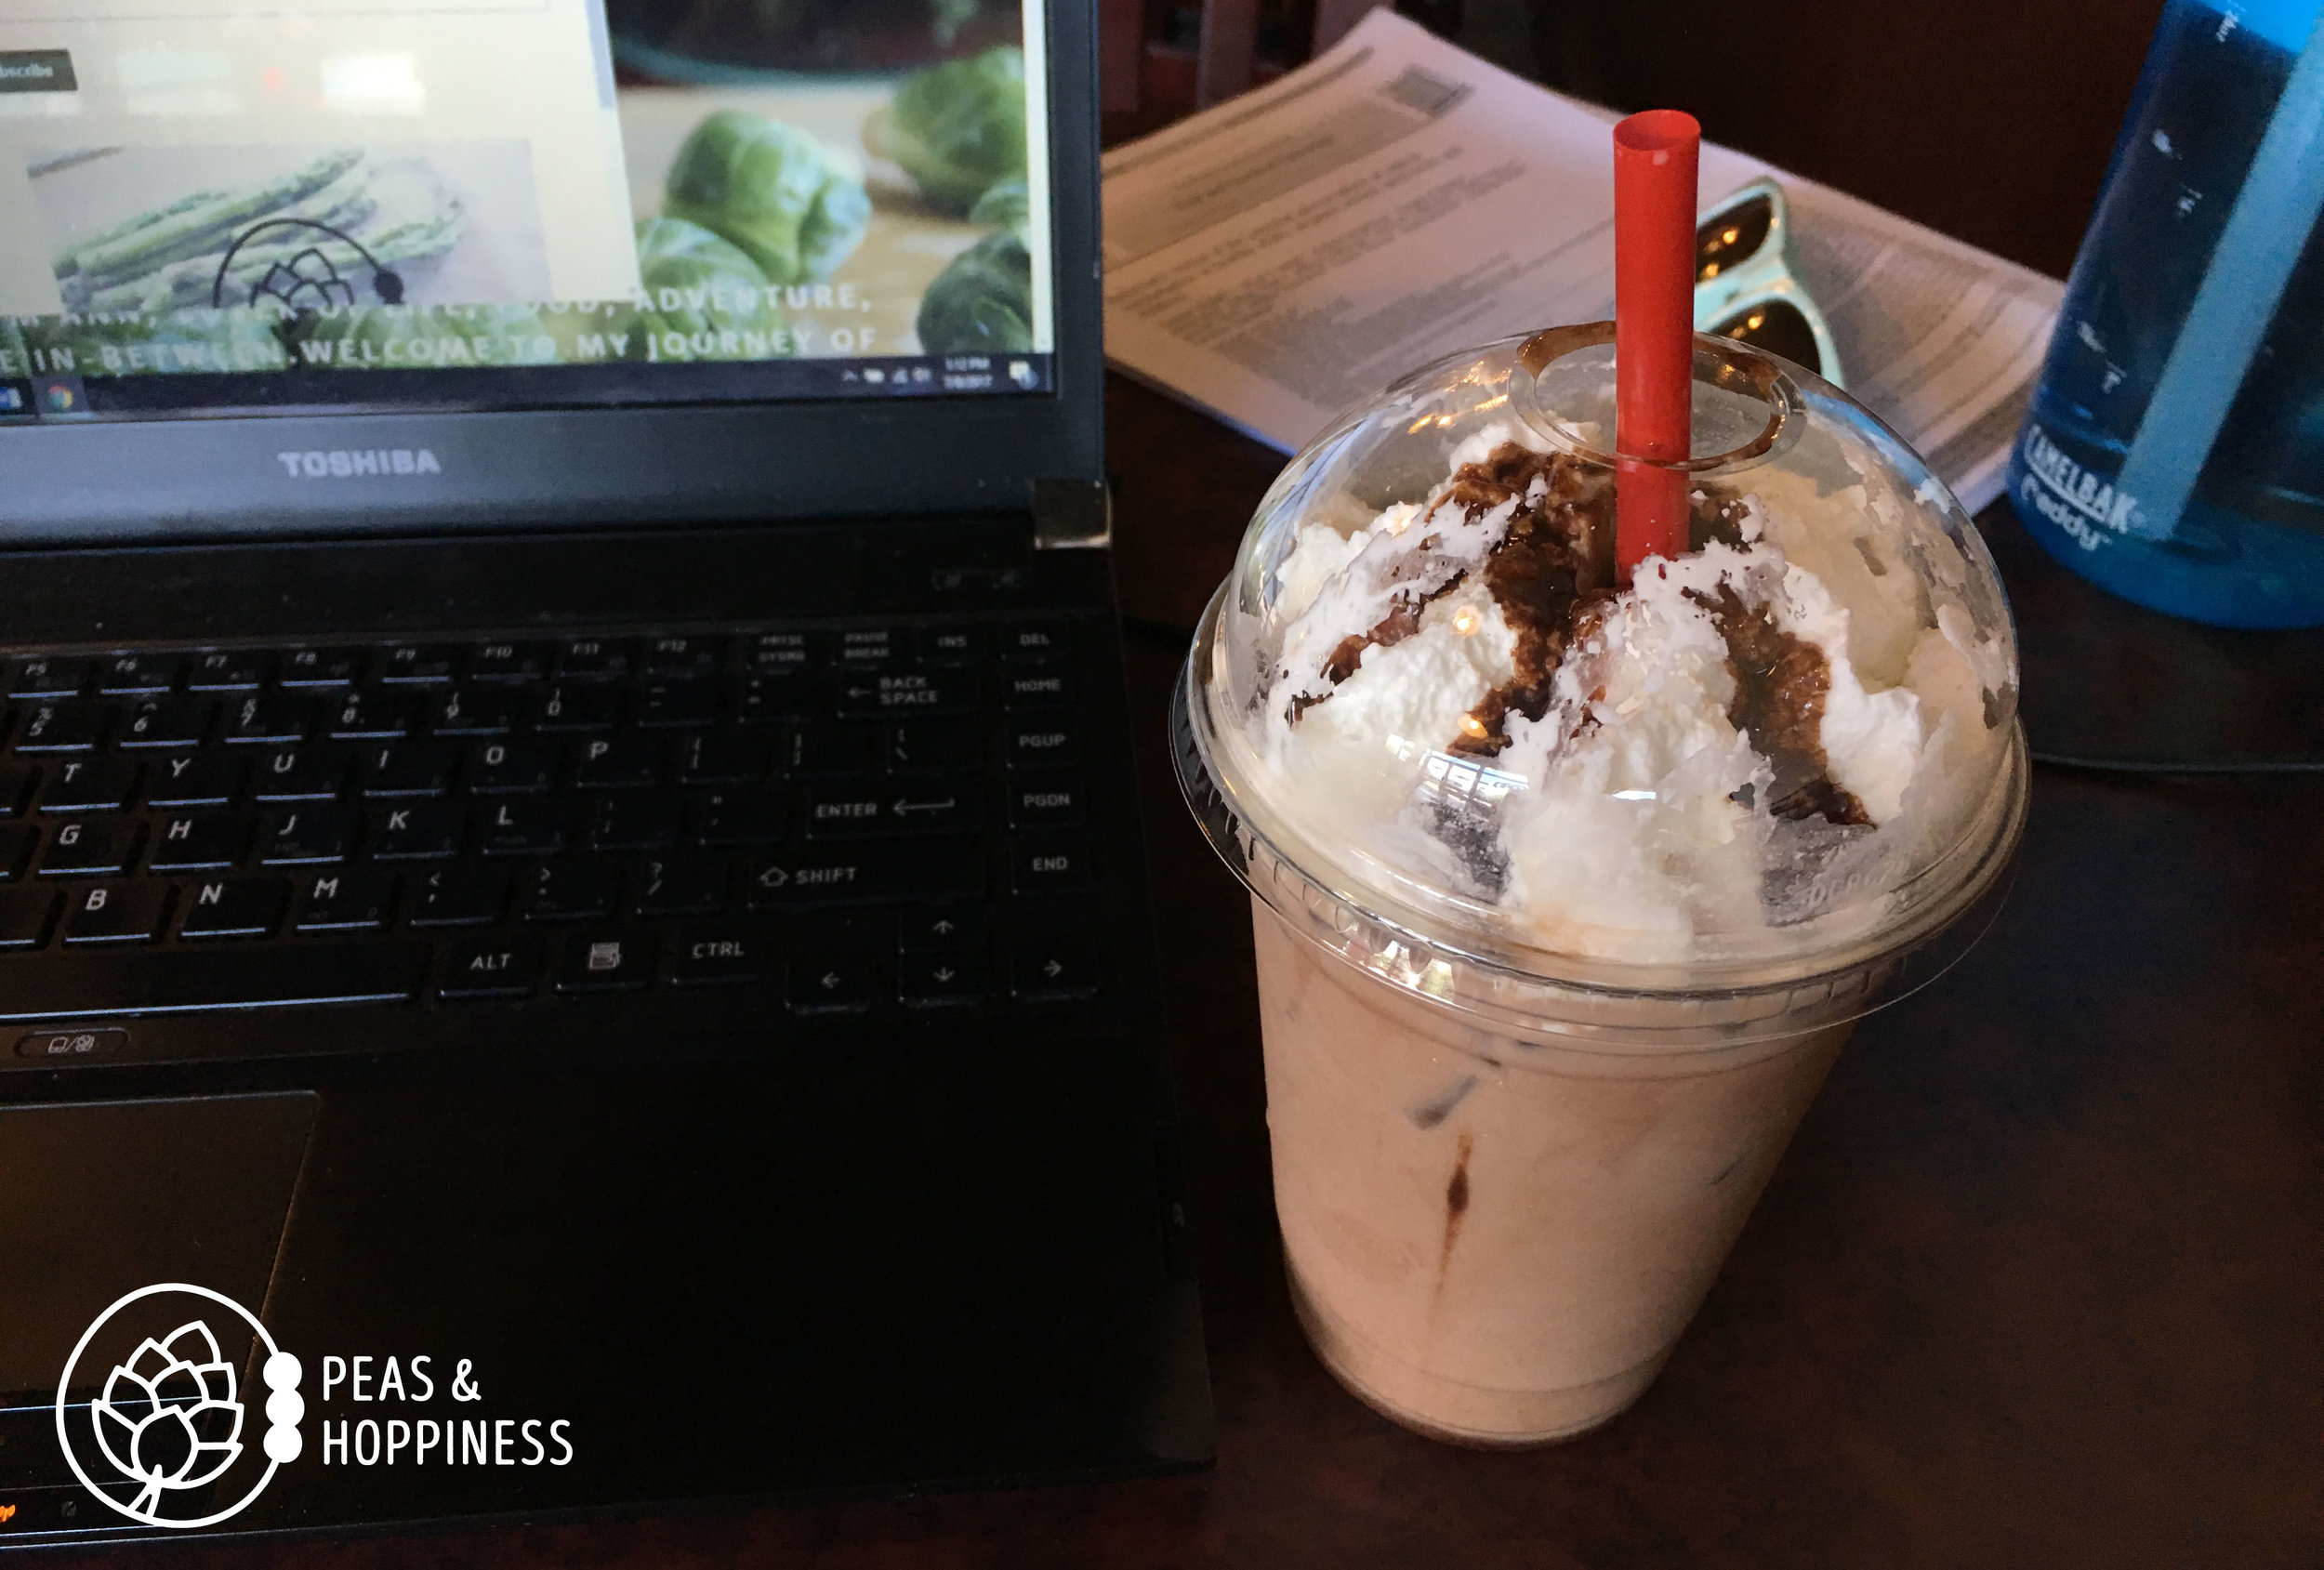 It's sugar-free, but not fat-free. I thoroughly enjoyed replenishing the calories I burned during my morning run with this "Heath Bar" iced coffee. Yum!